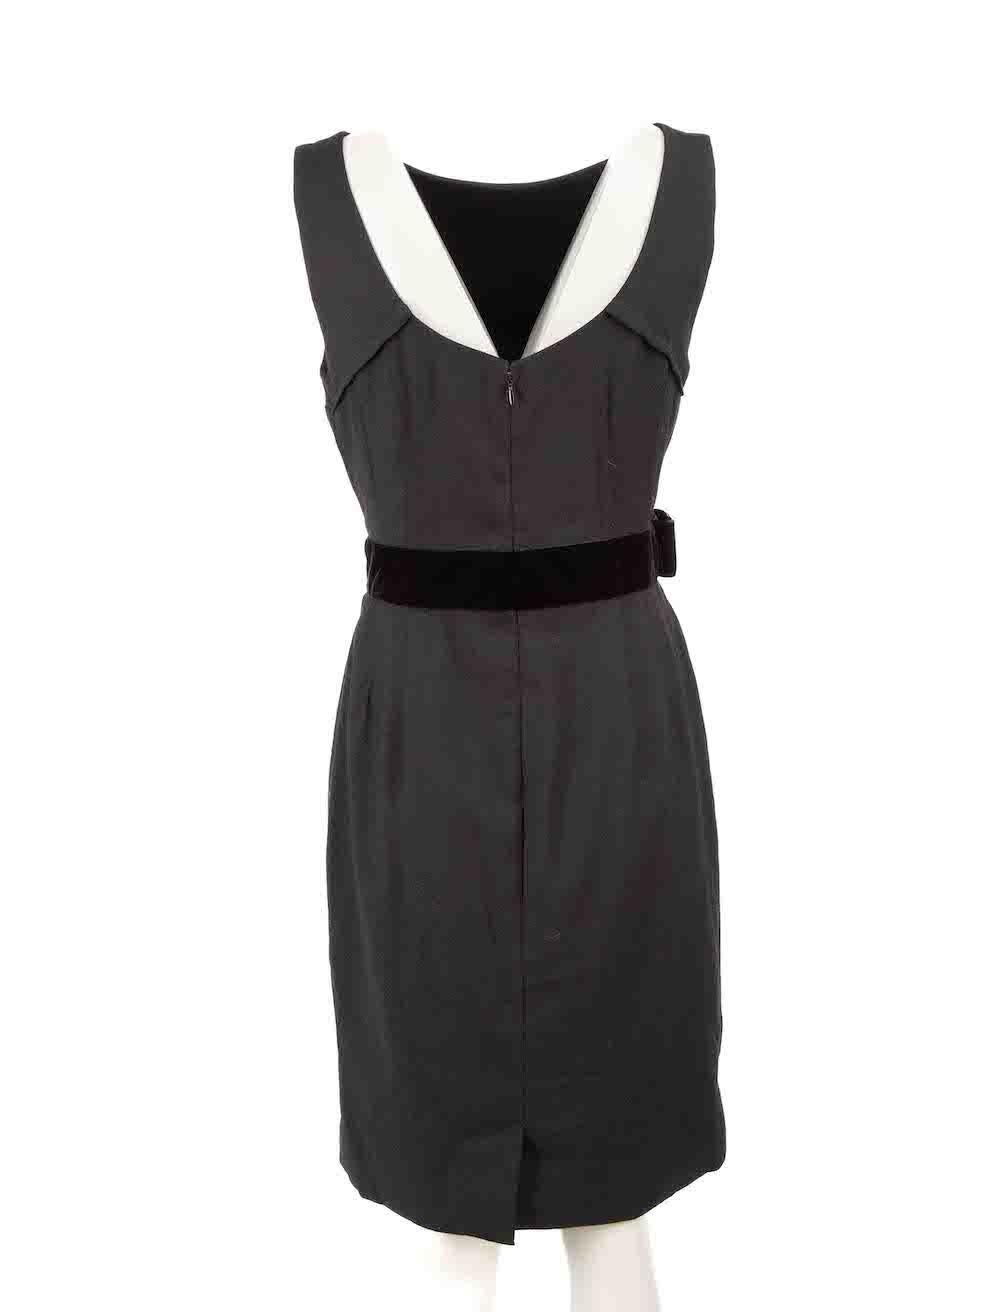 Dolce & Gabbana Black Wool Sleeveless Dress Size L In Excellent Condition For Sale In London, GB